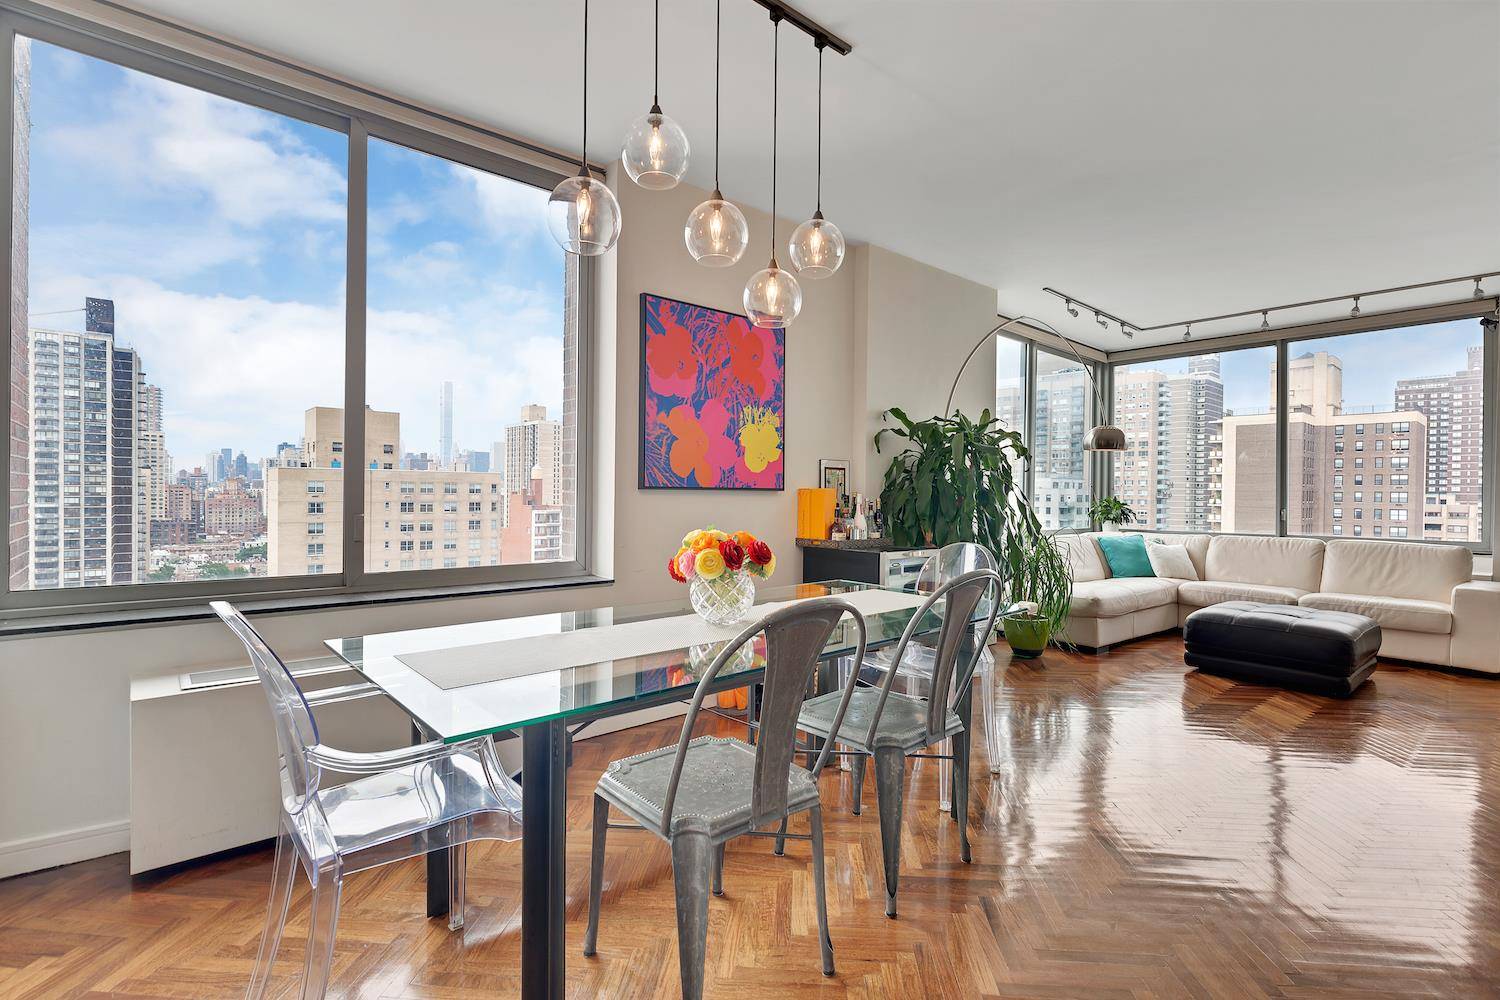 Two bedroom Condo with open South and West city views and in unit washer and dryer in an amenity driven Upper East Side condominium.